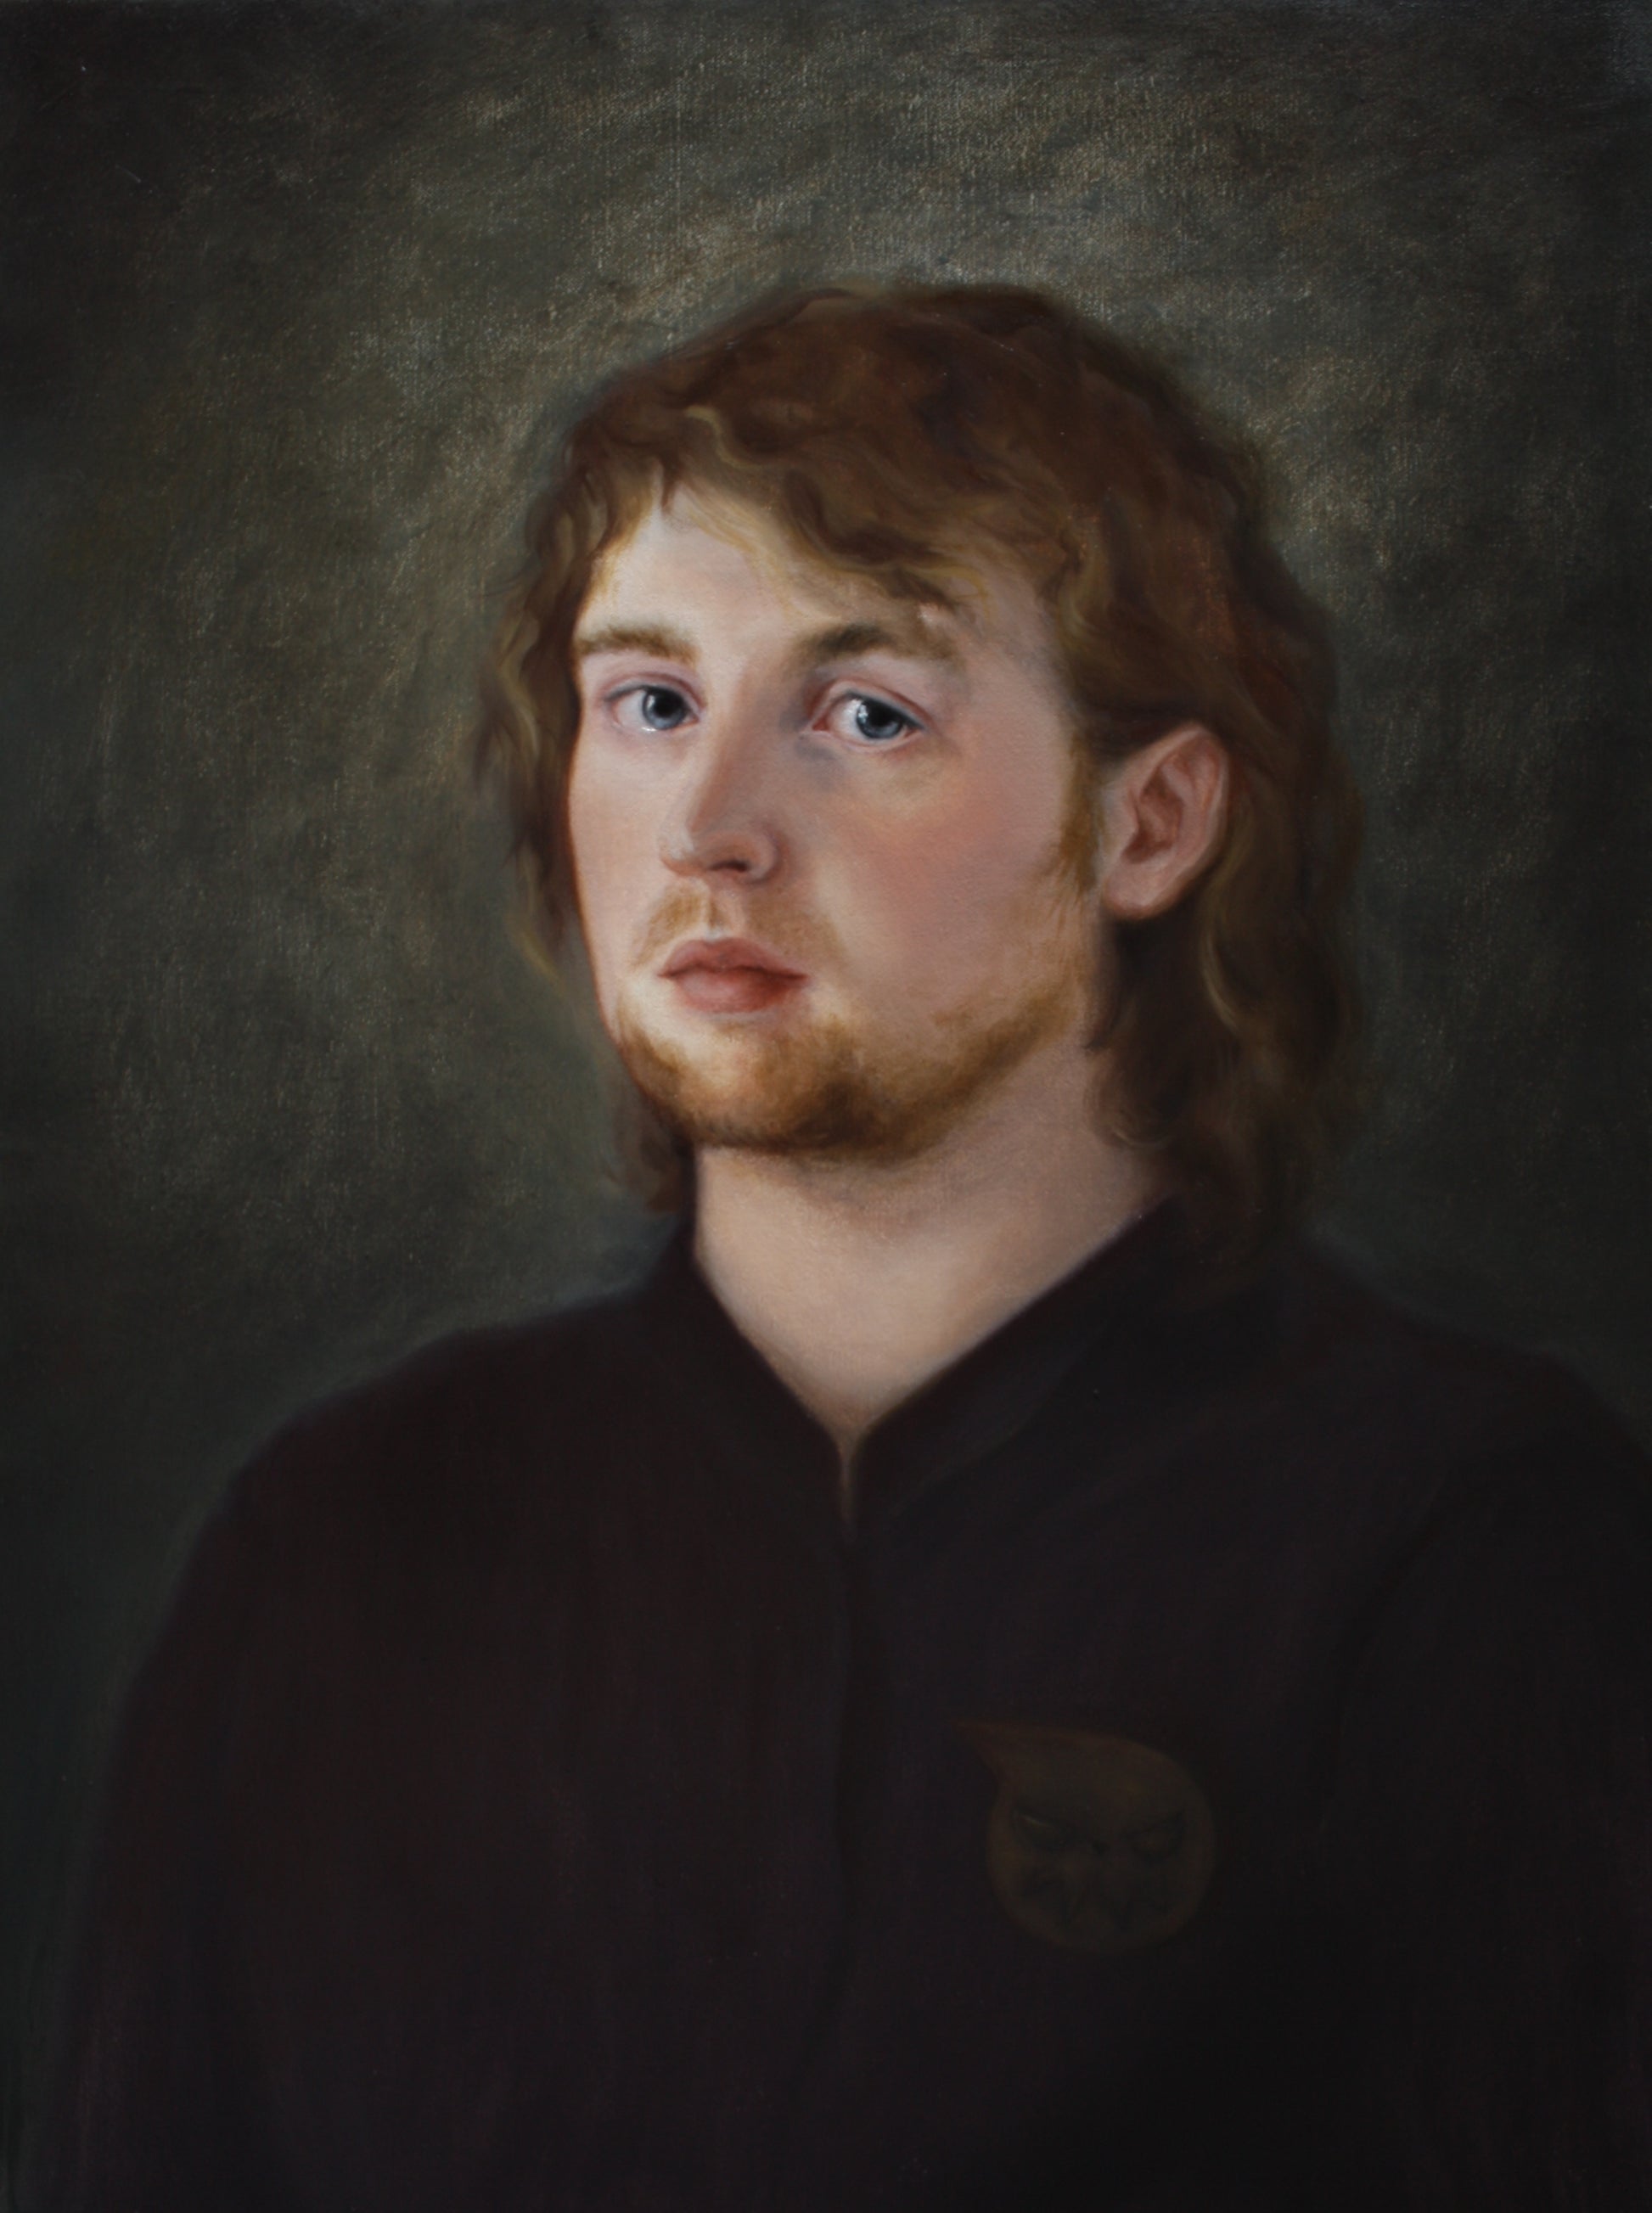 Oil painting of a young white man with golden curly hair and beard. He is wearing a purple collarless shirt and making eye contact with the viewer.